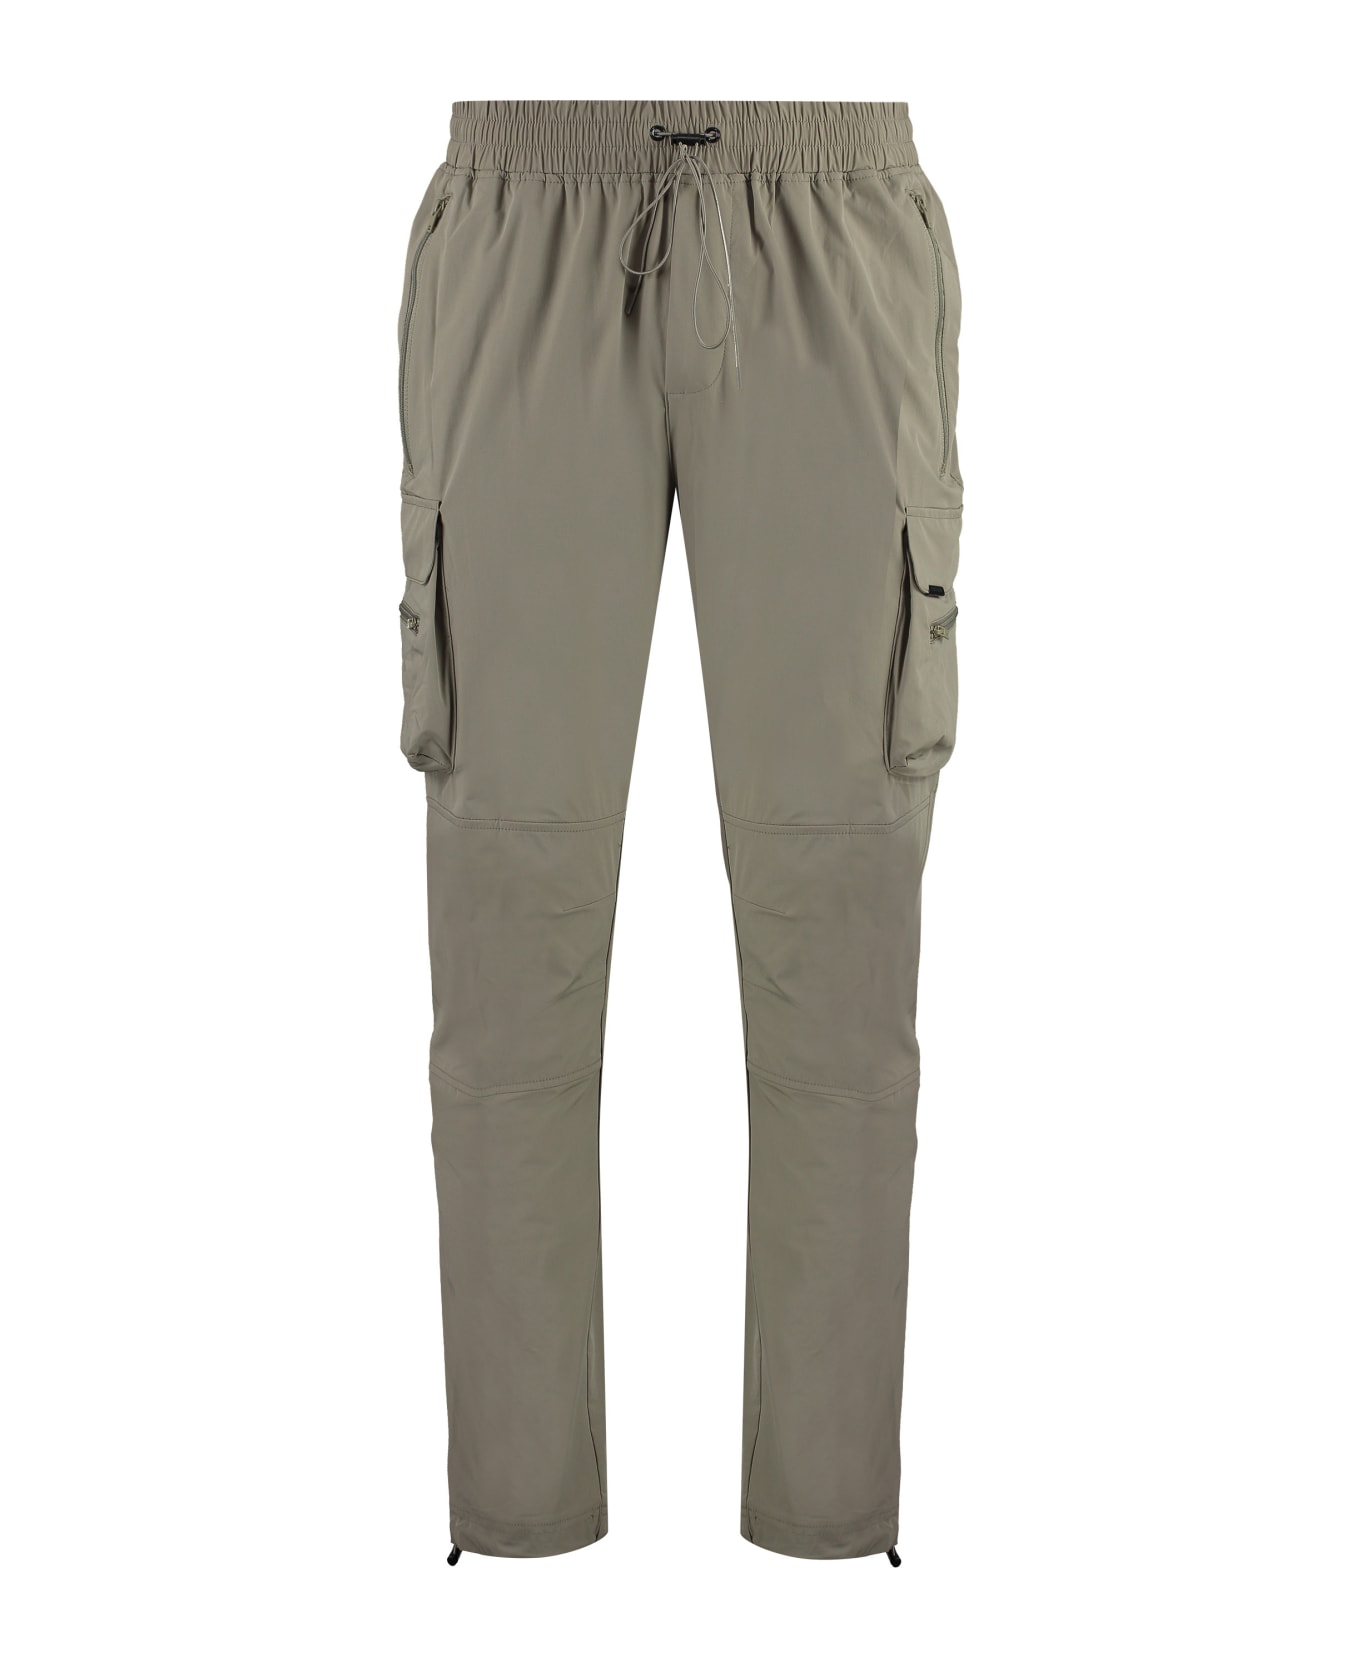 REPRESENT 247 Cargo Trousers - brown